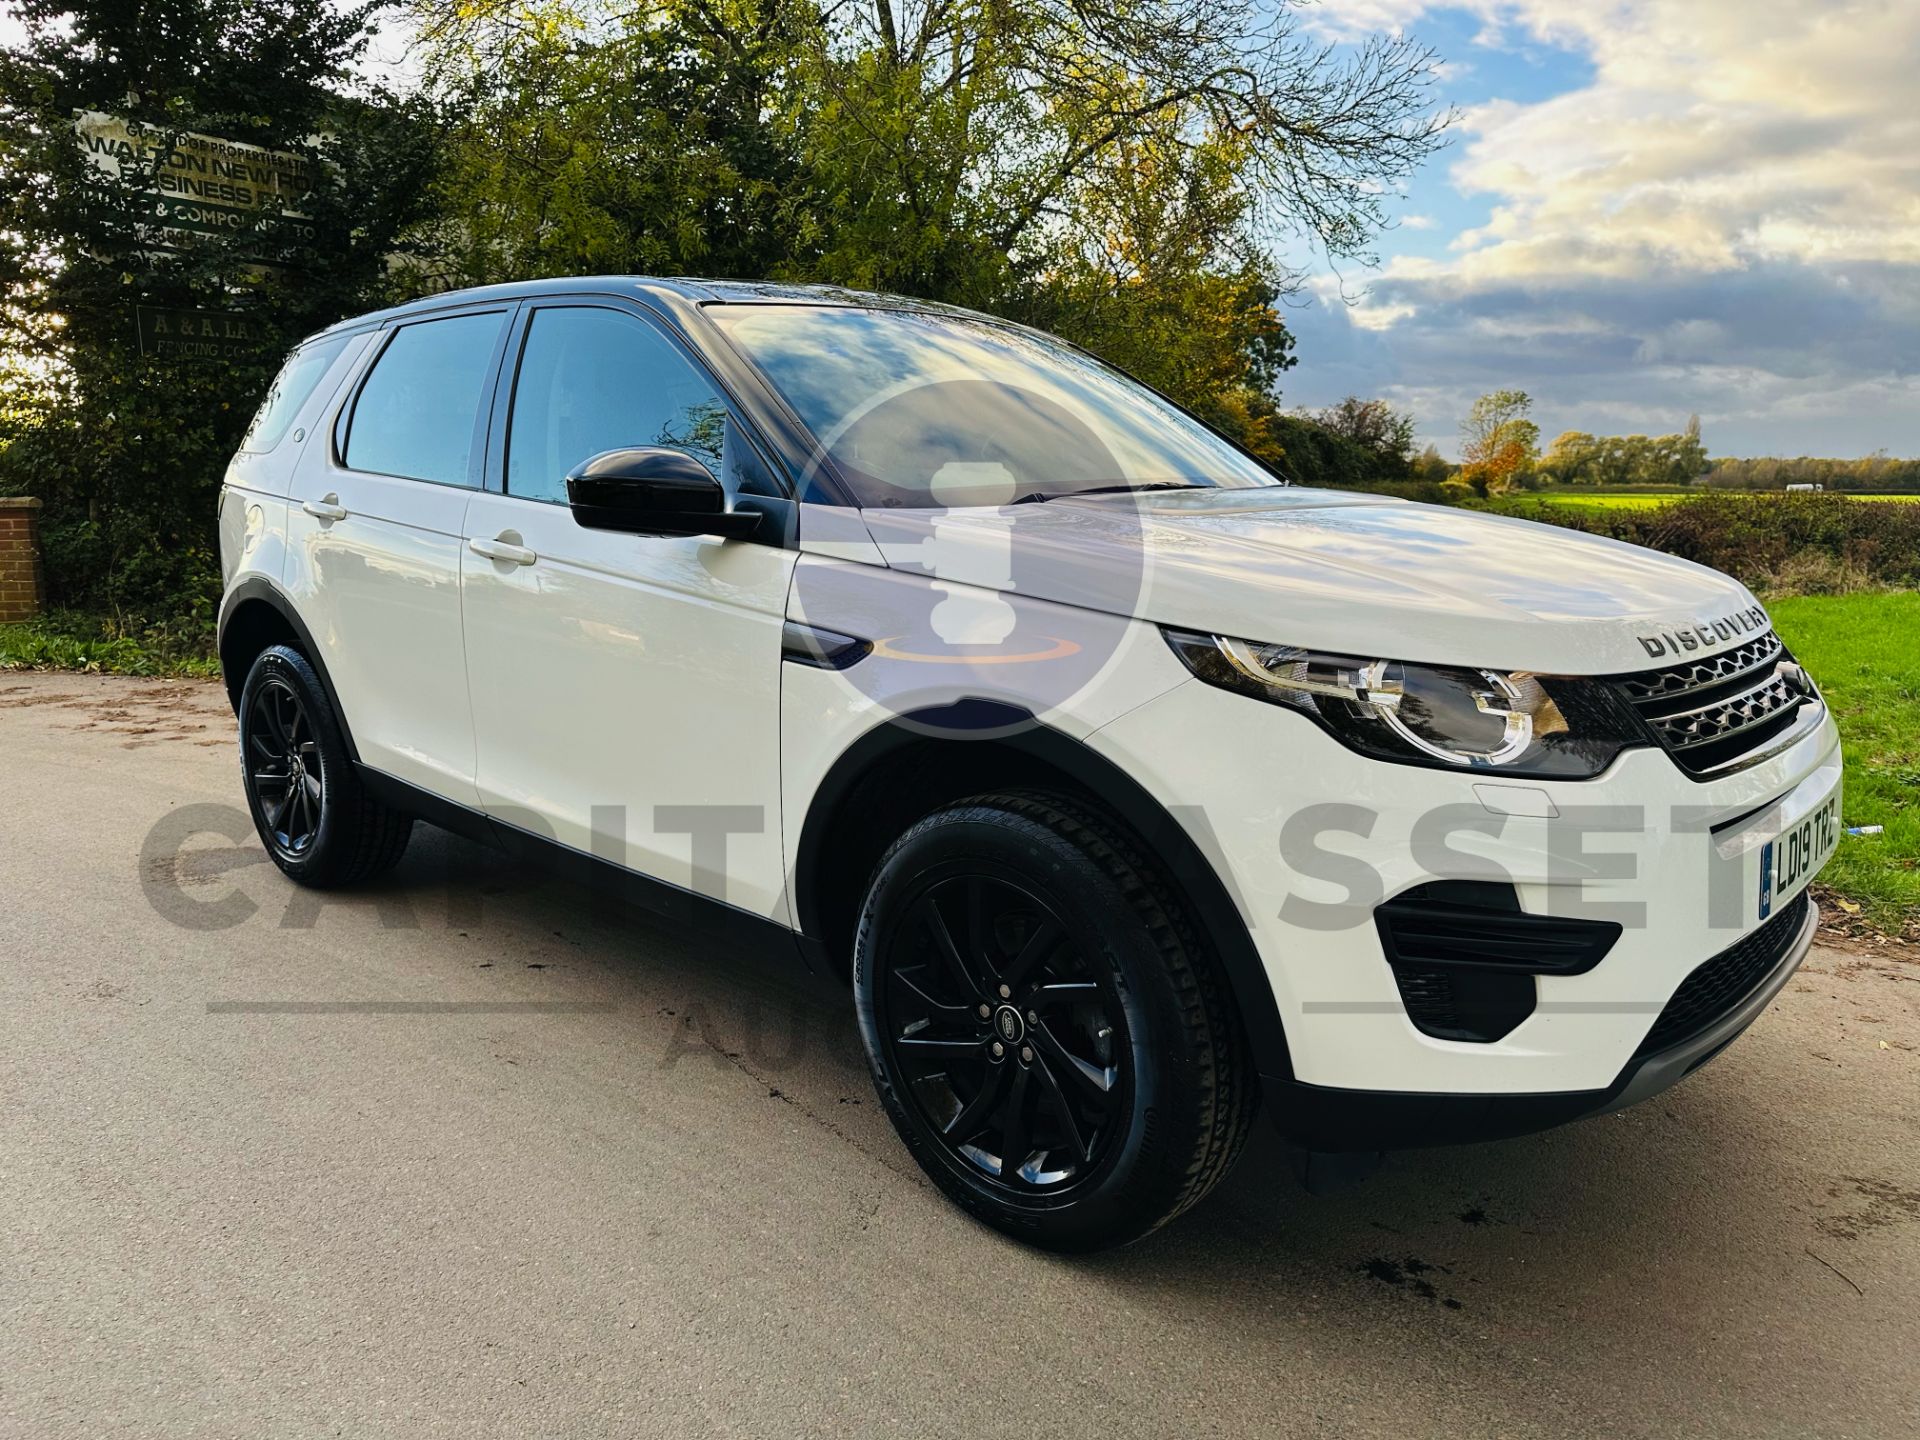 (On Sale) LAND ROVER DISCOVERY SPORT *SE* 5 DOOR SUV (2019 - EURO 6) 2.0 ED4 - AUTO STOP/START - Image 2 of 38